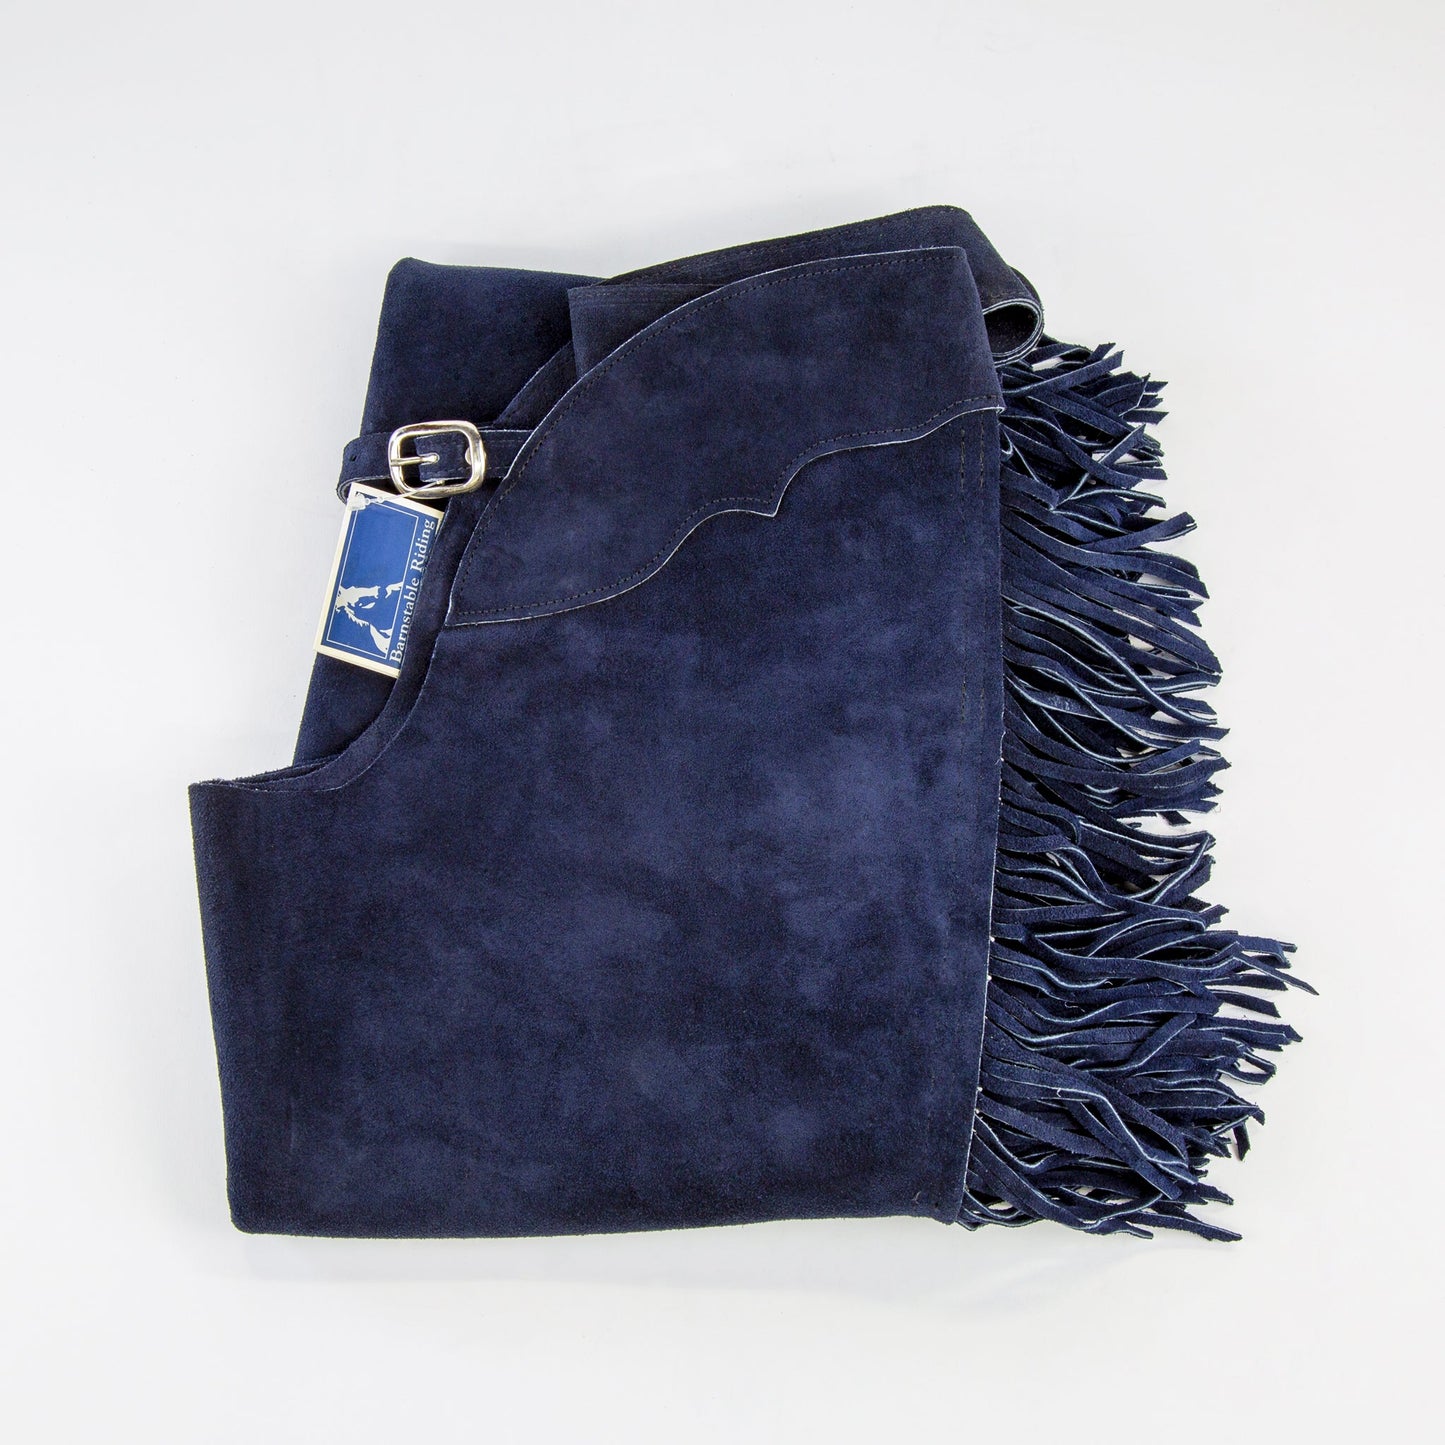 Western Bootcut Chaps - Navy Suede - Fringe